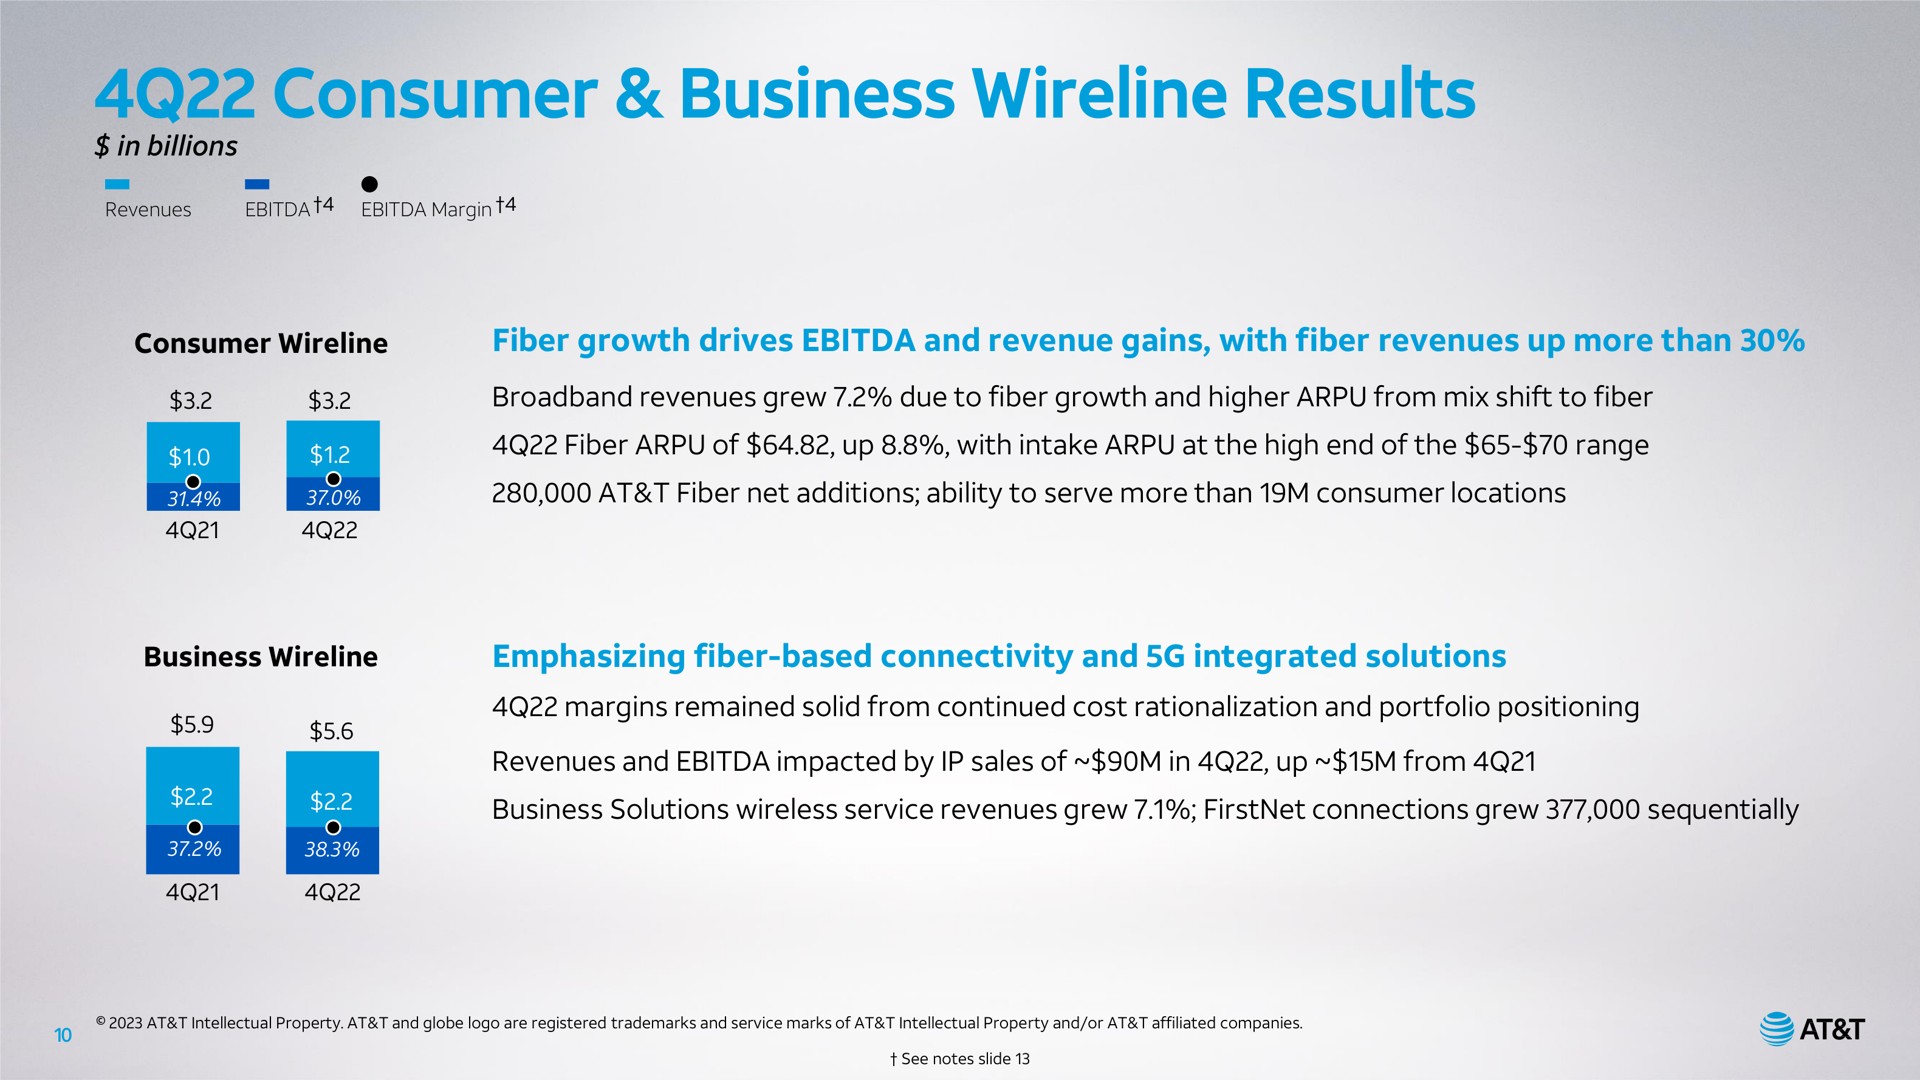 consumer business results in billions consumer fiber growth drives and revenue gains with fiber revenues up more than revenues grew due to fiber growth and higher from mix shift to fiber fiber of up with intake at the high end of the range at fiber net additions ability to serve more than consumer locations business emphasizing fiber based connectivity and integrated solutions margins remained solid from continued cost rationalization and portfolio positioning revenues and impacted by sales of in up from business solutions wireless service revenues grew connections grew sequentially | AT&T